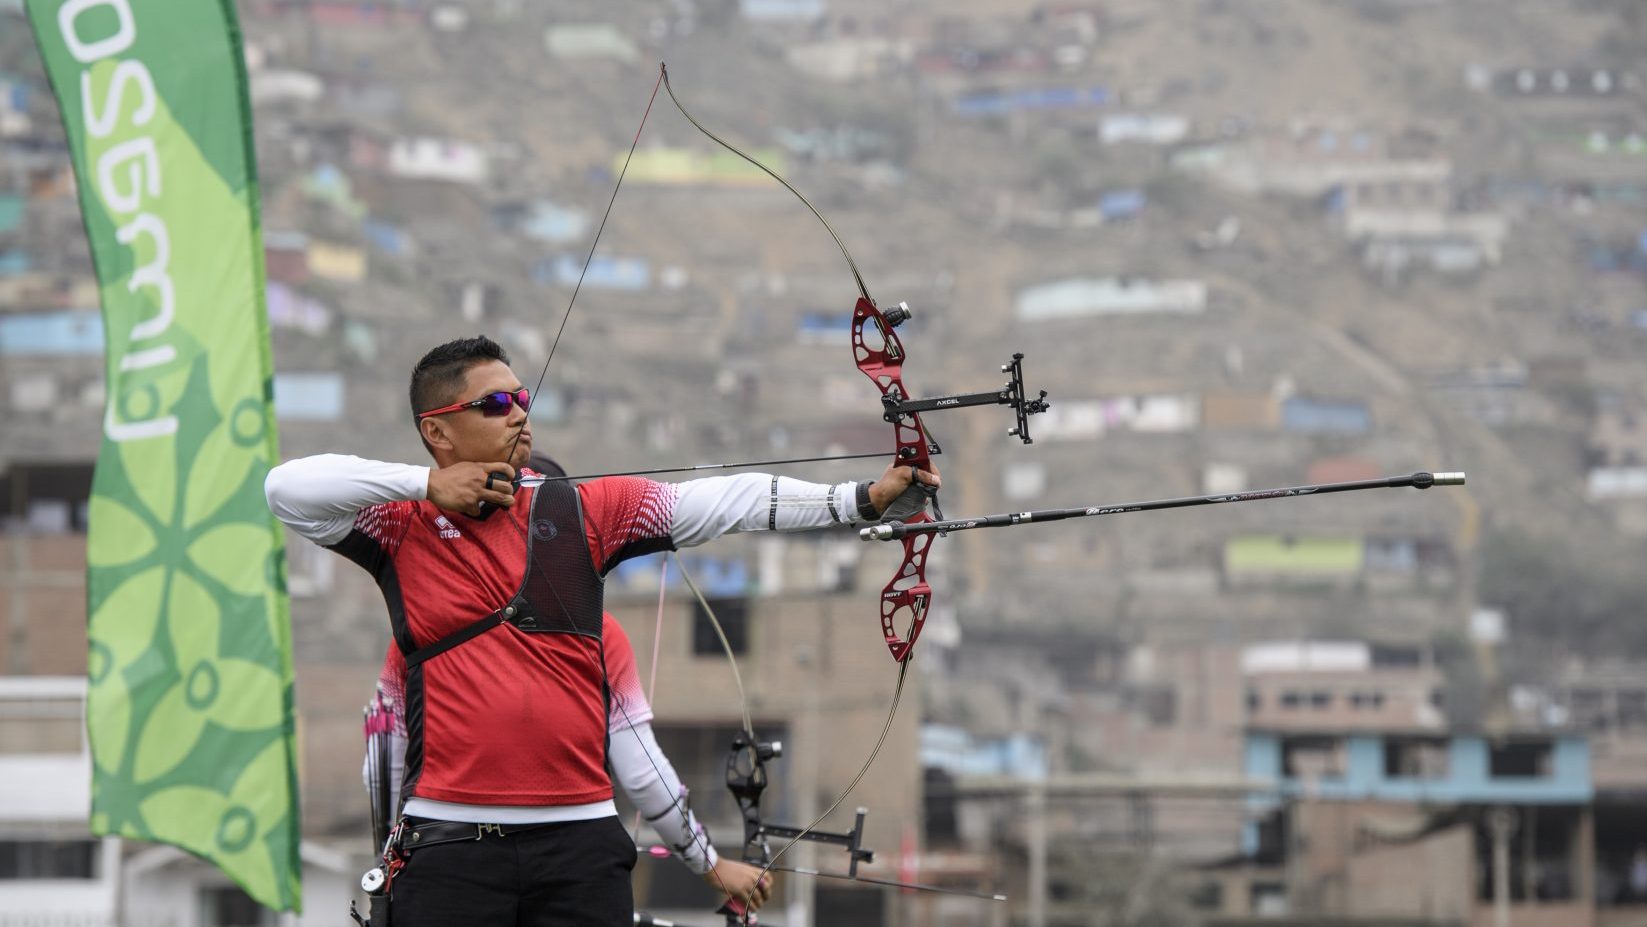 Crispin Duenas competes in archery at Lima 2019 